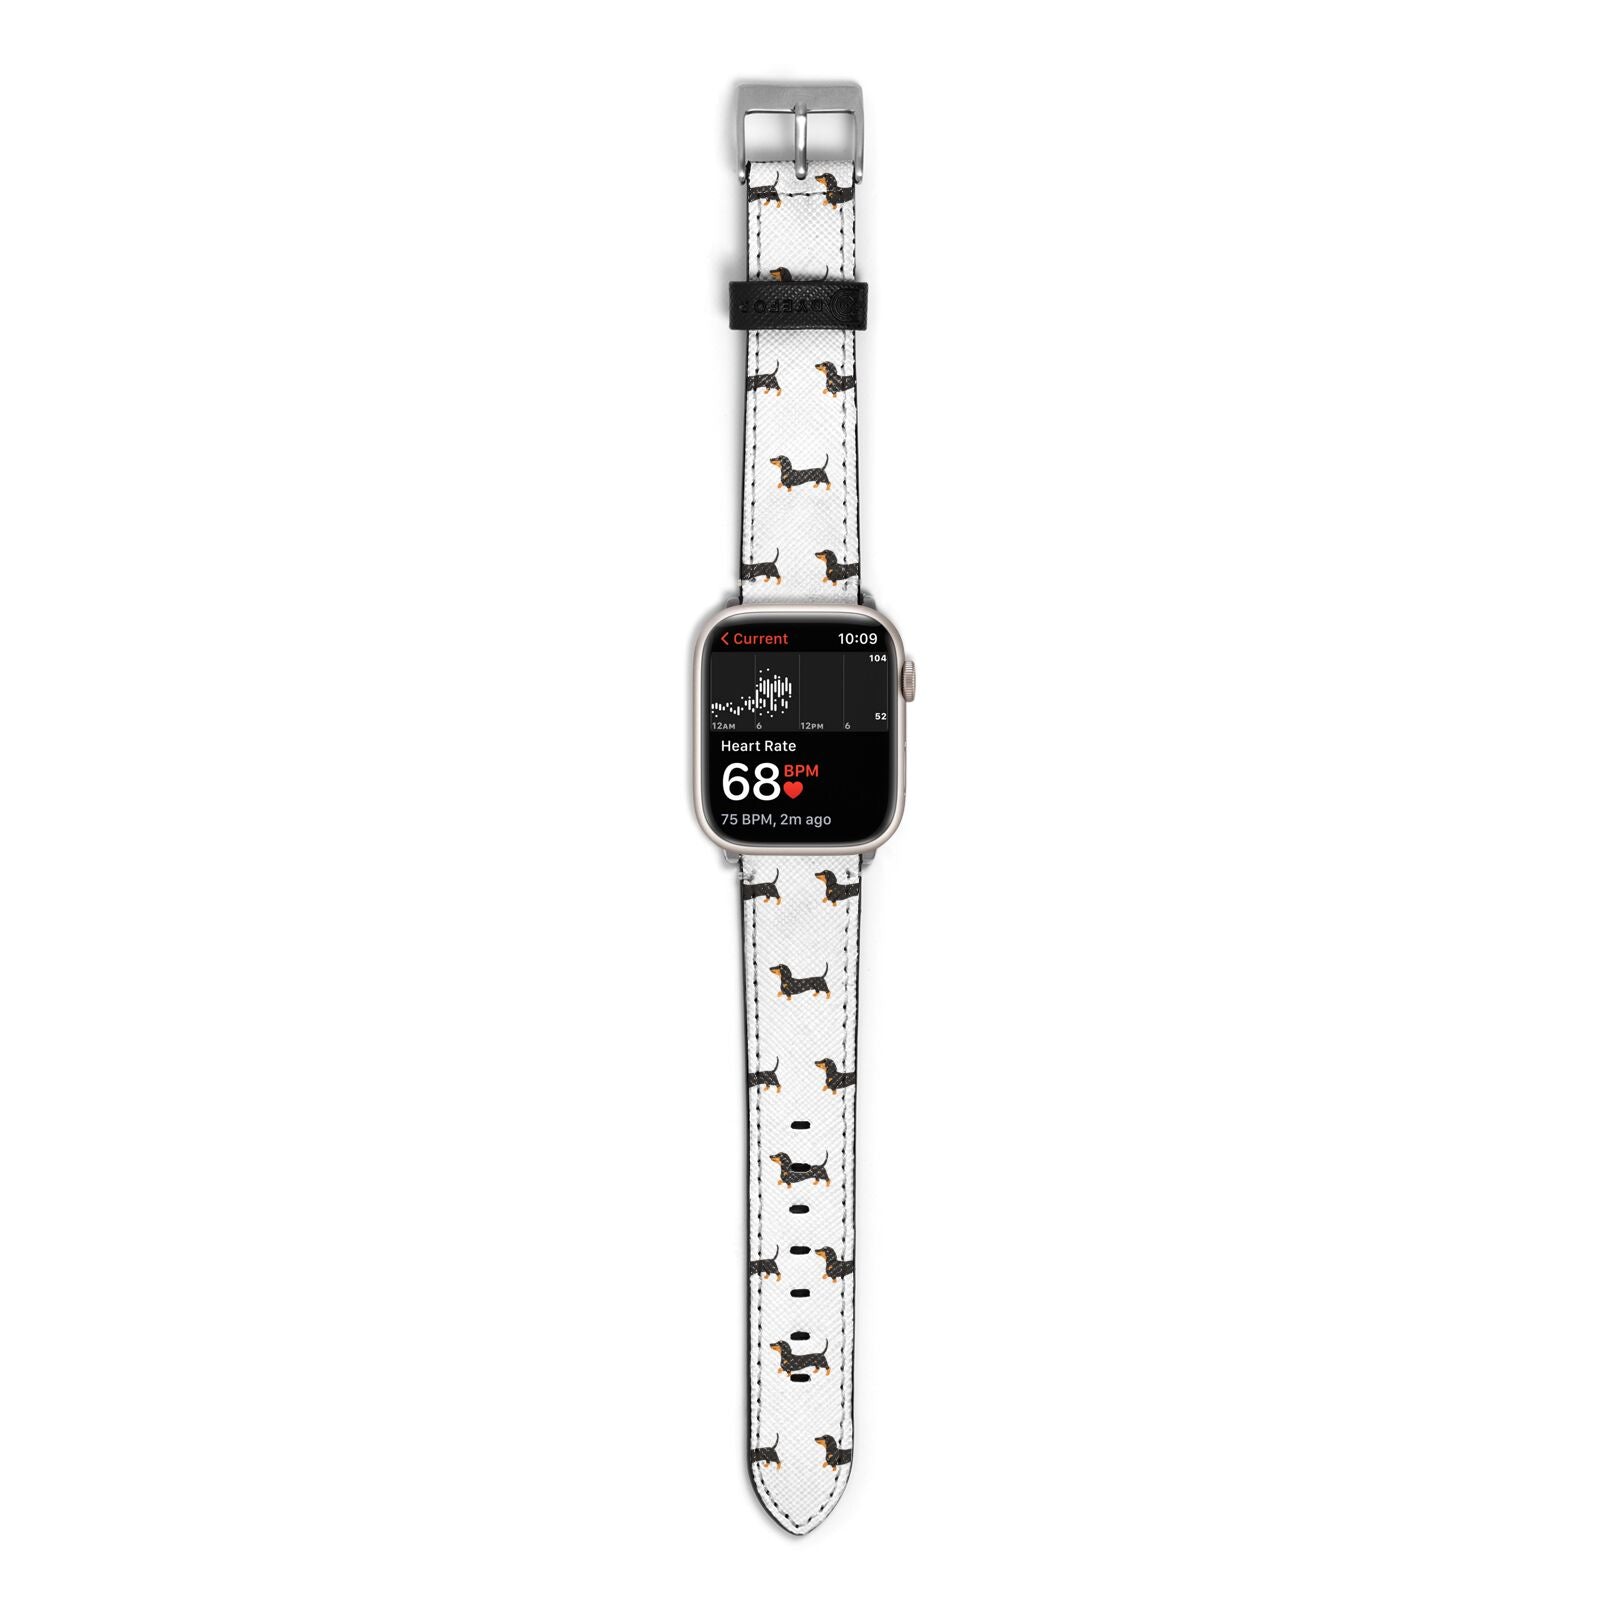 Dachshund Apple Watch Strap Size 38mm with Silver Hardware